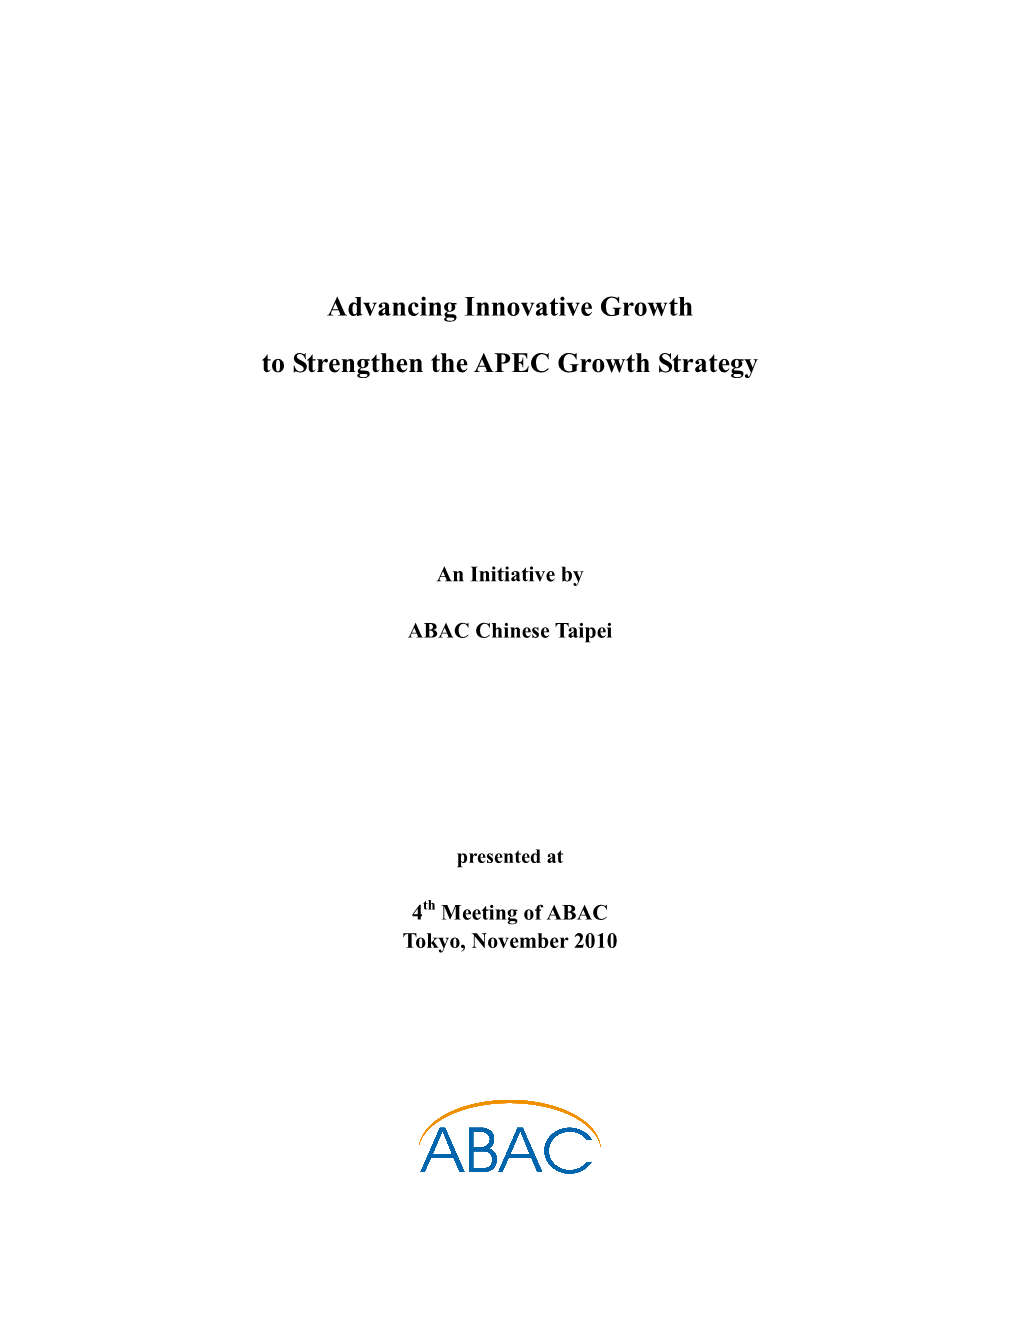 Advancing Innovative Growth to Strengthen the APEC Growth Strategy